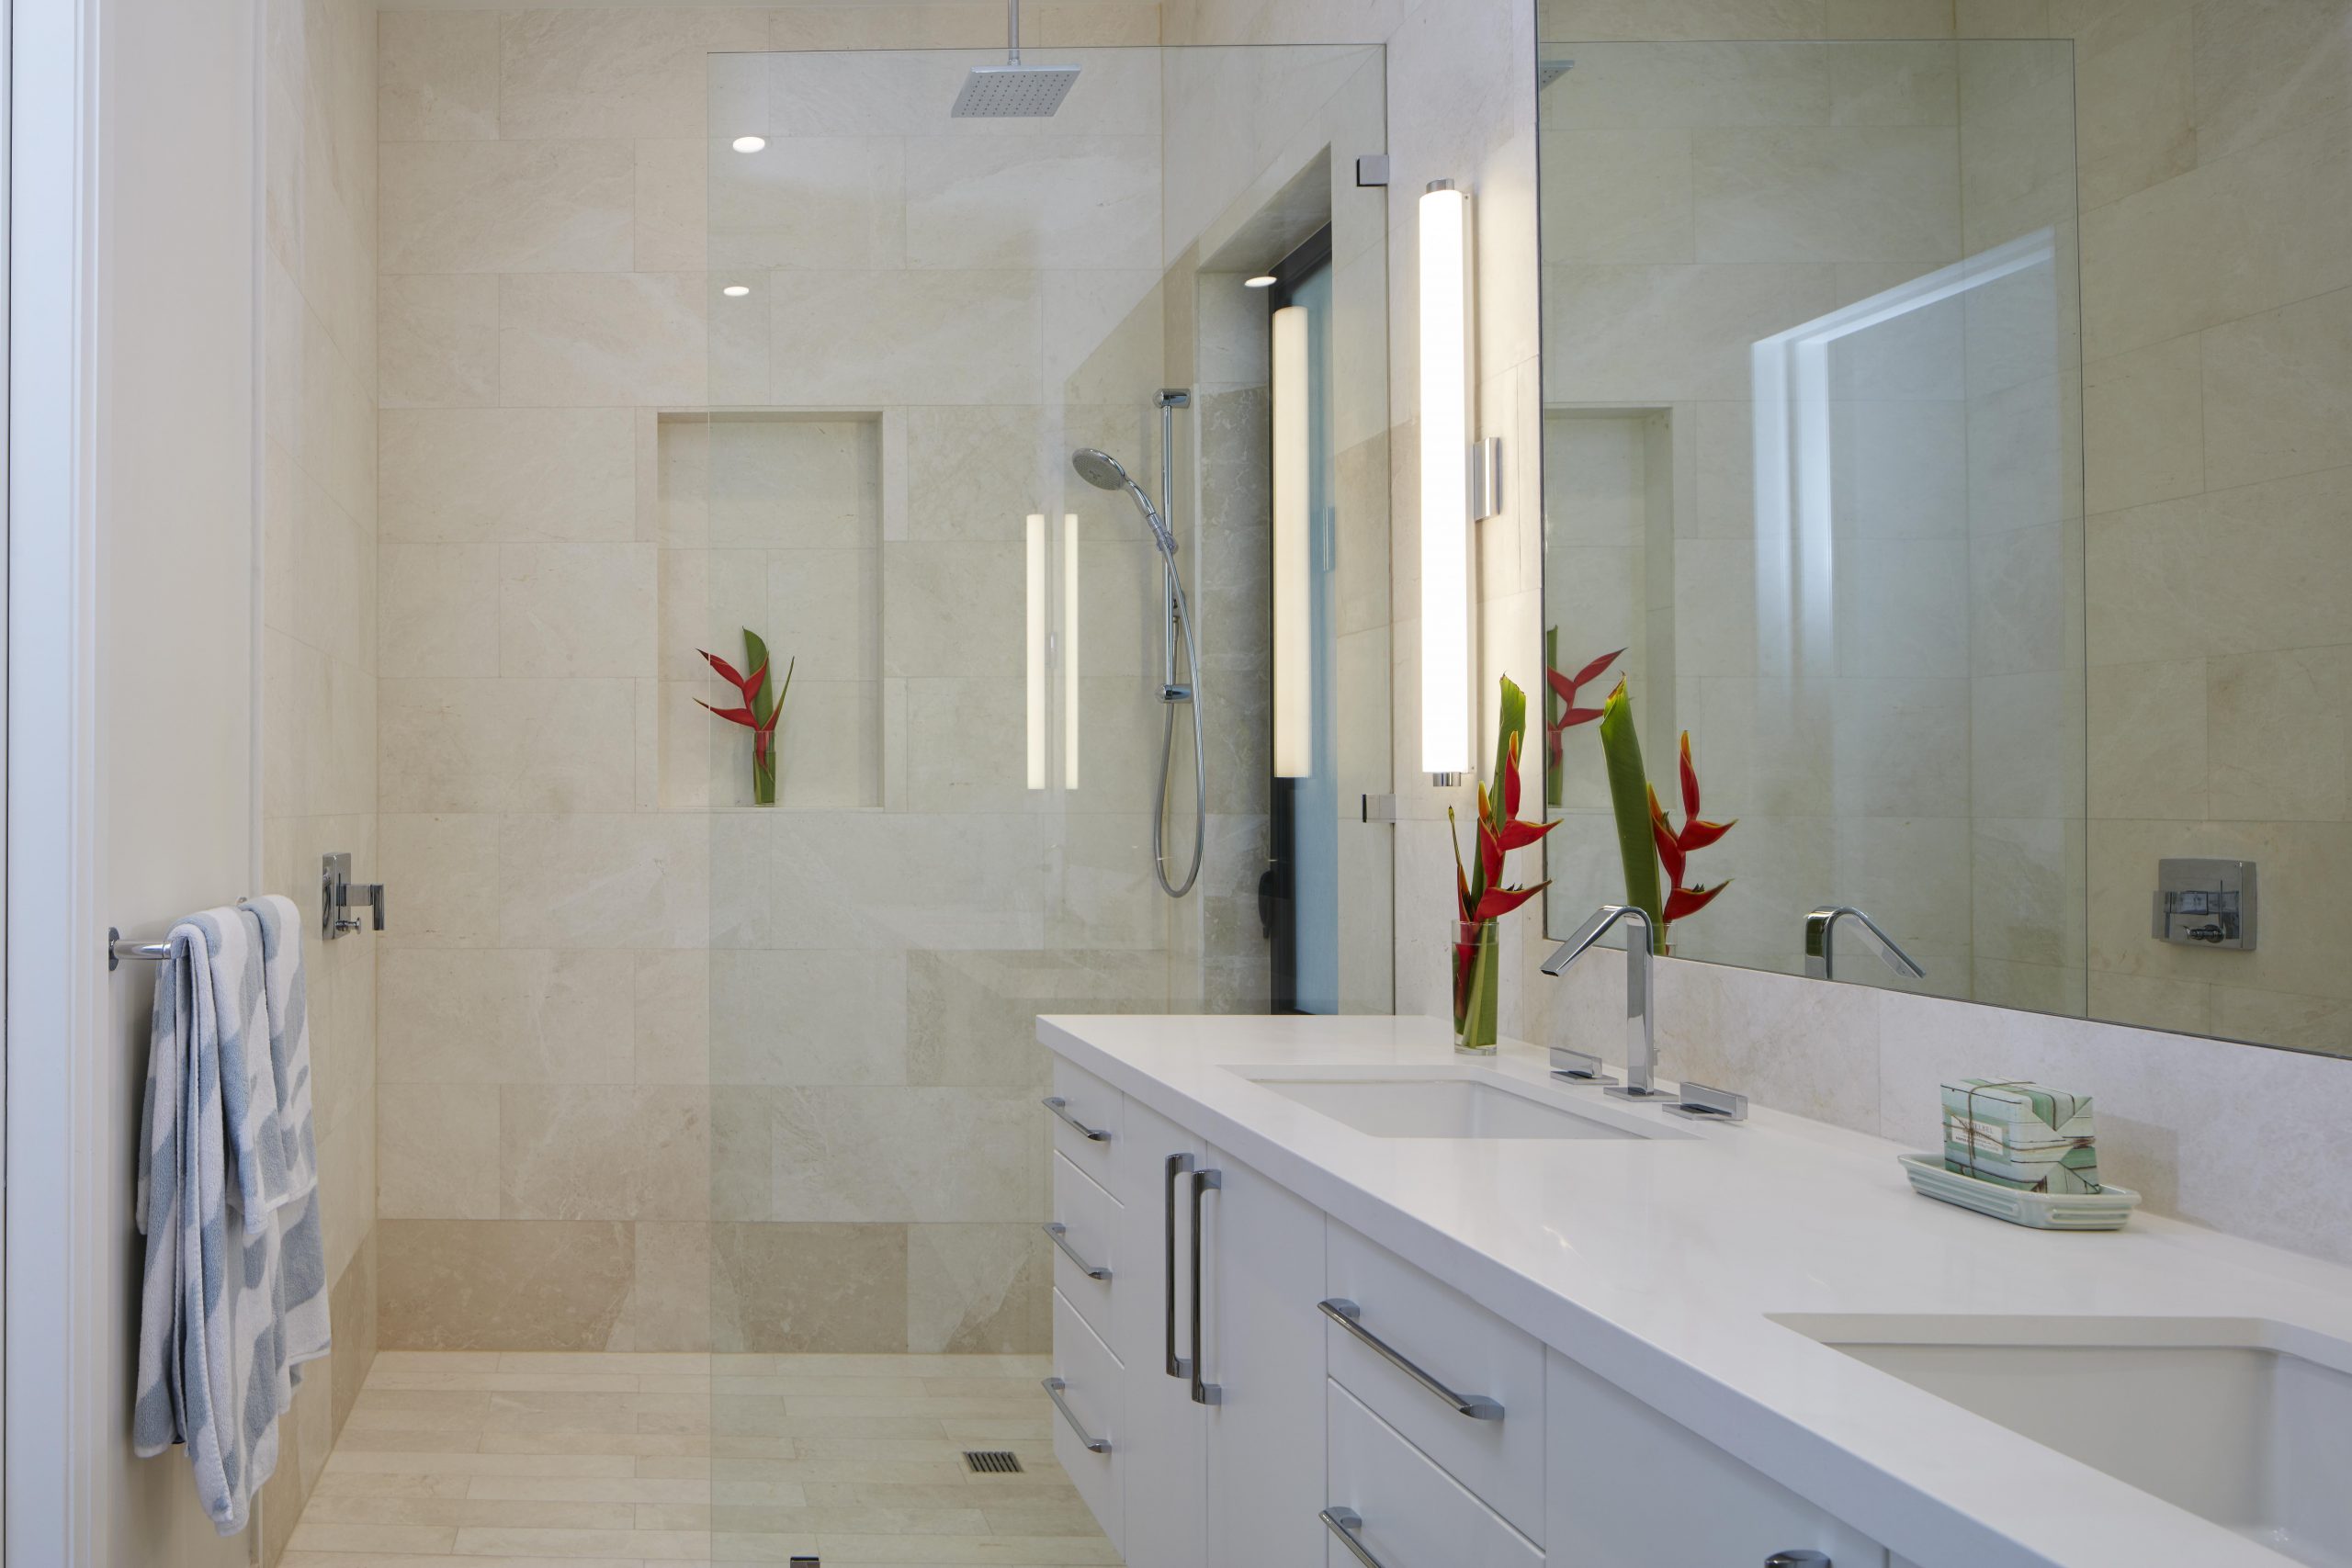 Bathrooms - SMG Millwork